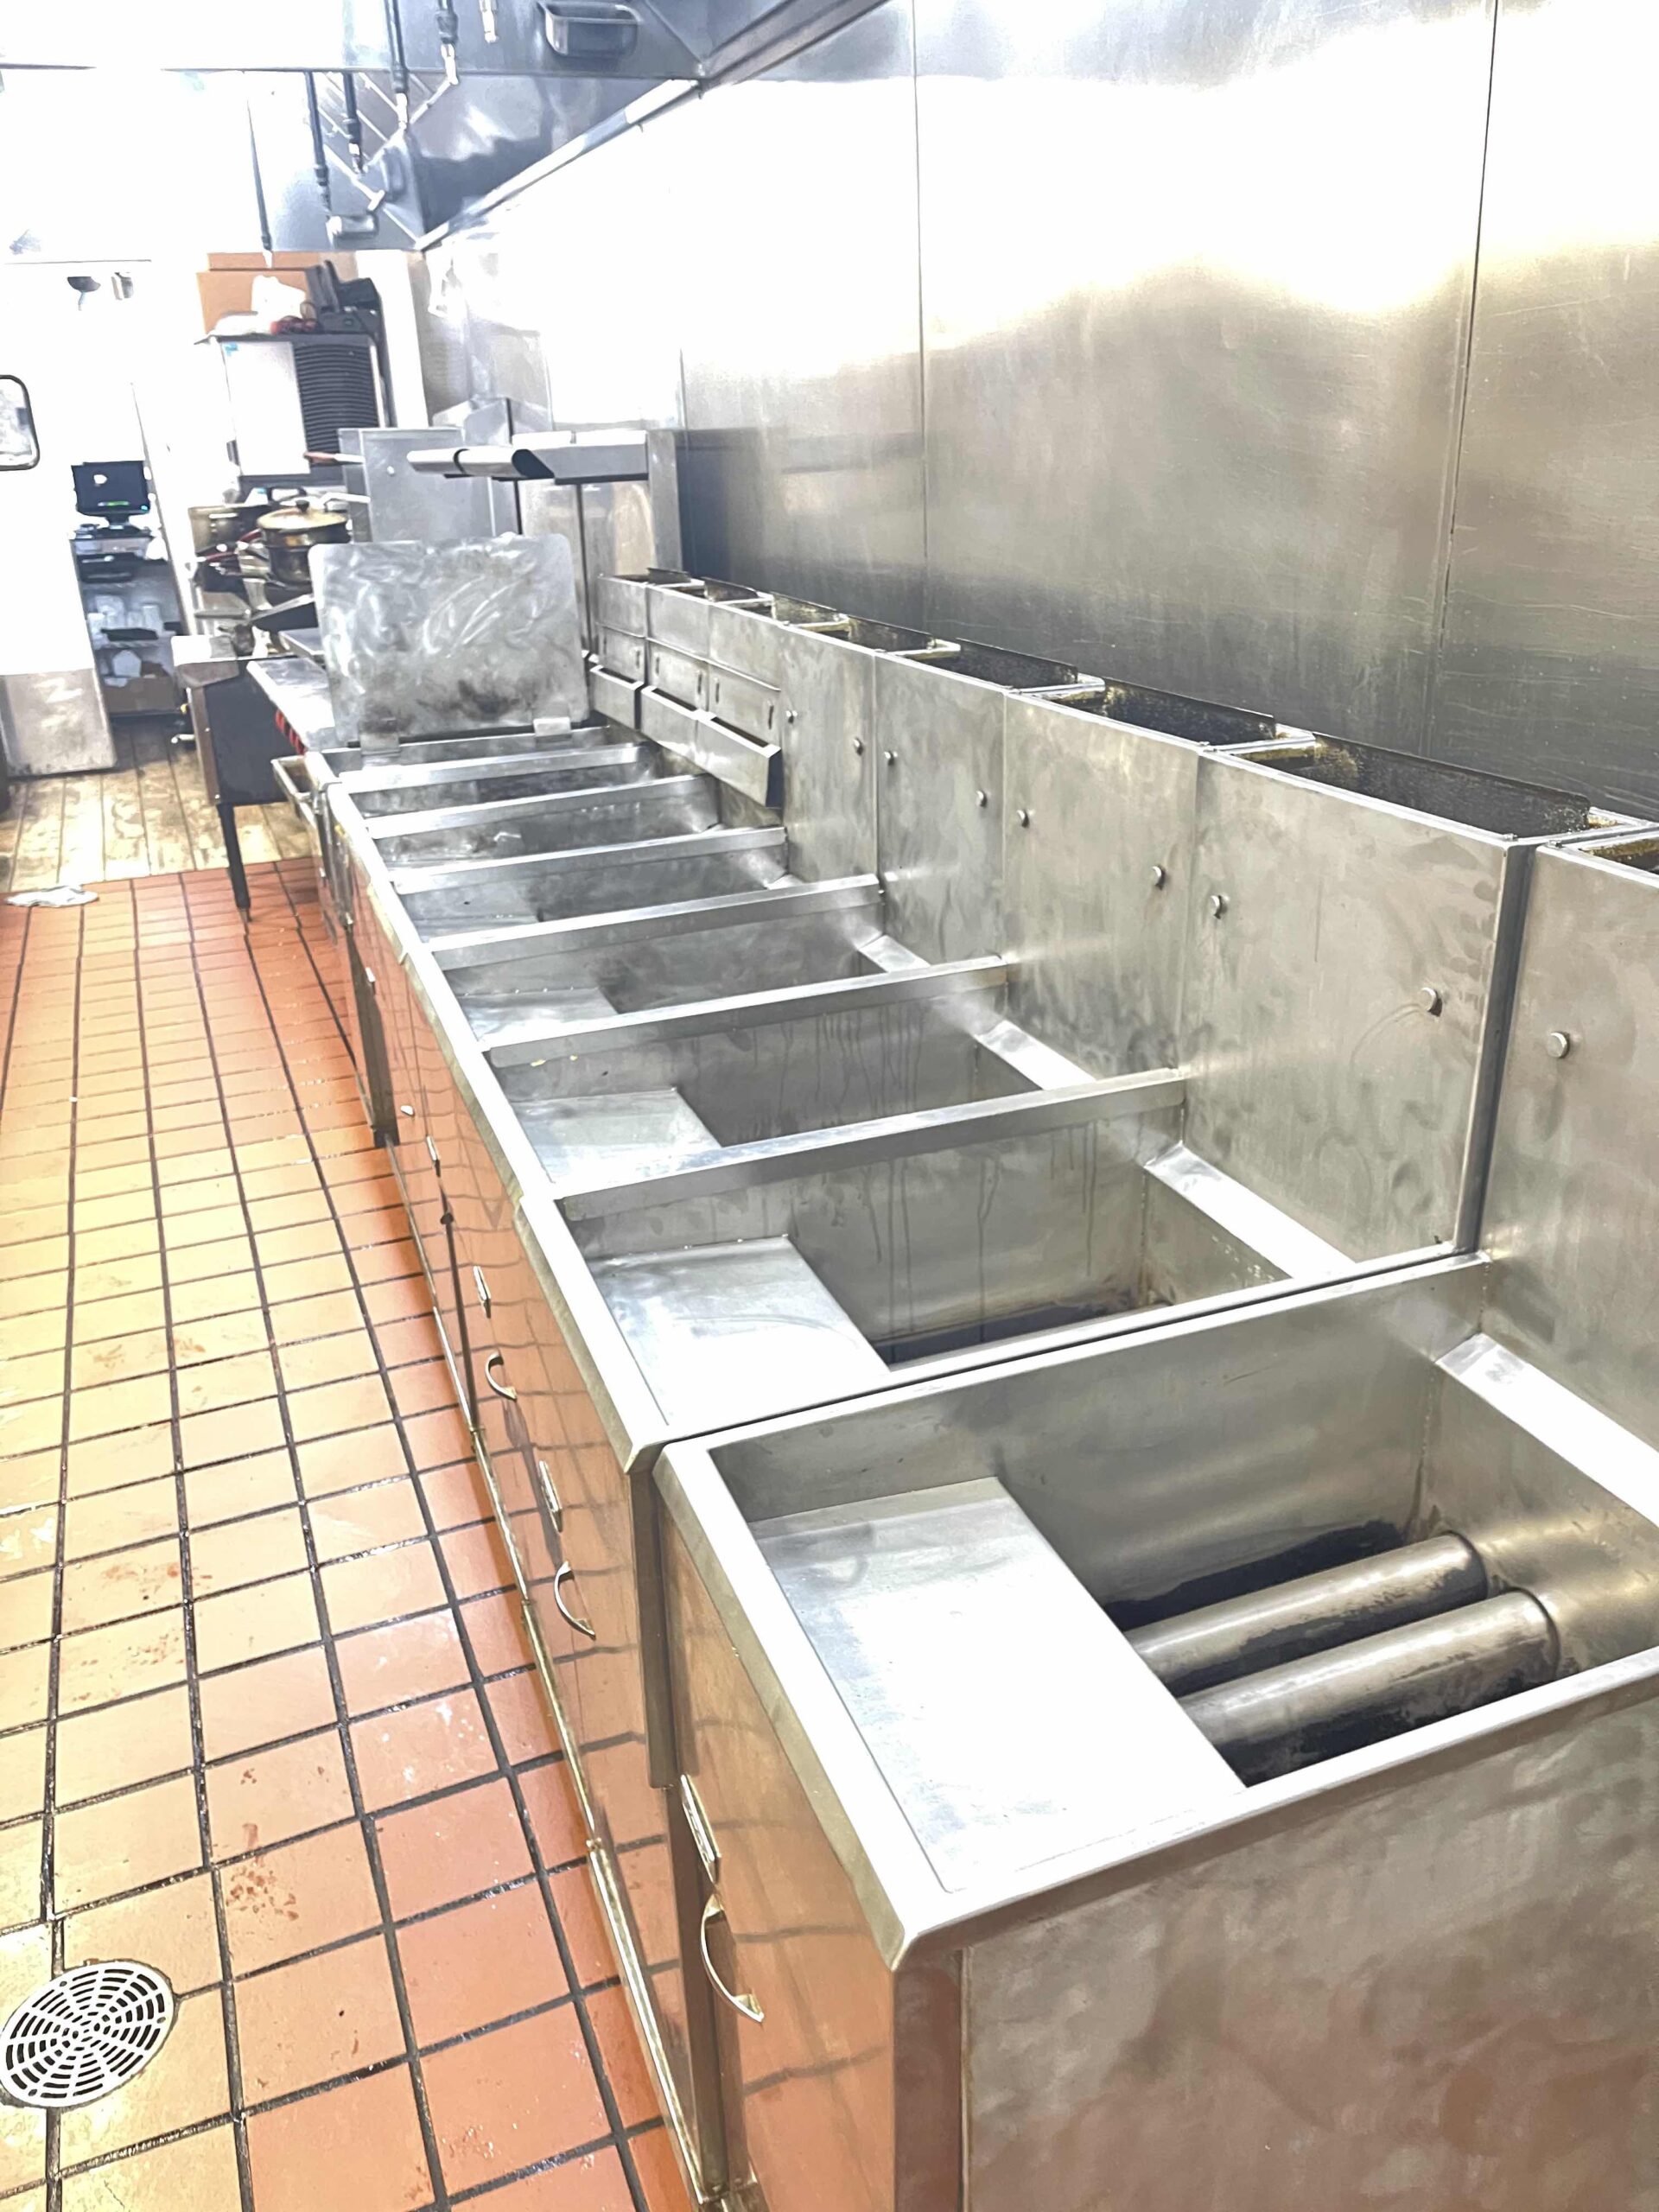 Commercial Fryer Cleaning Services | RamPro